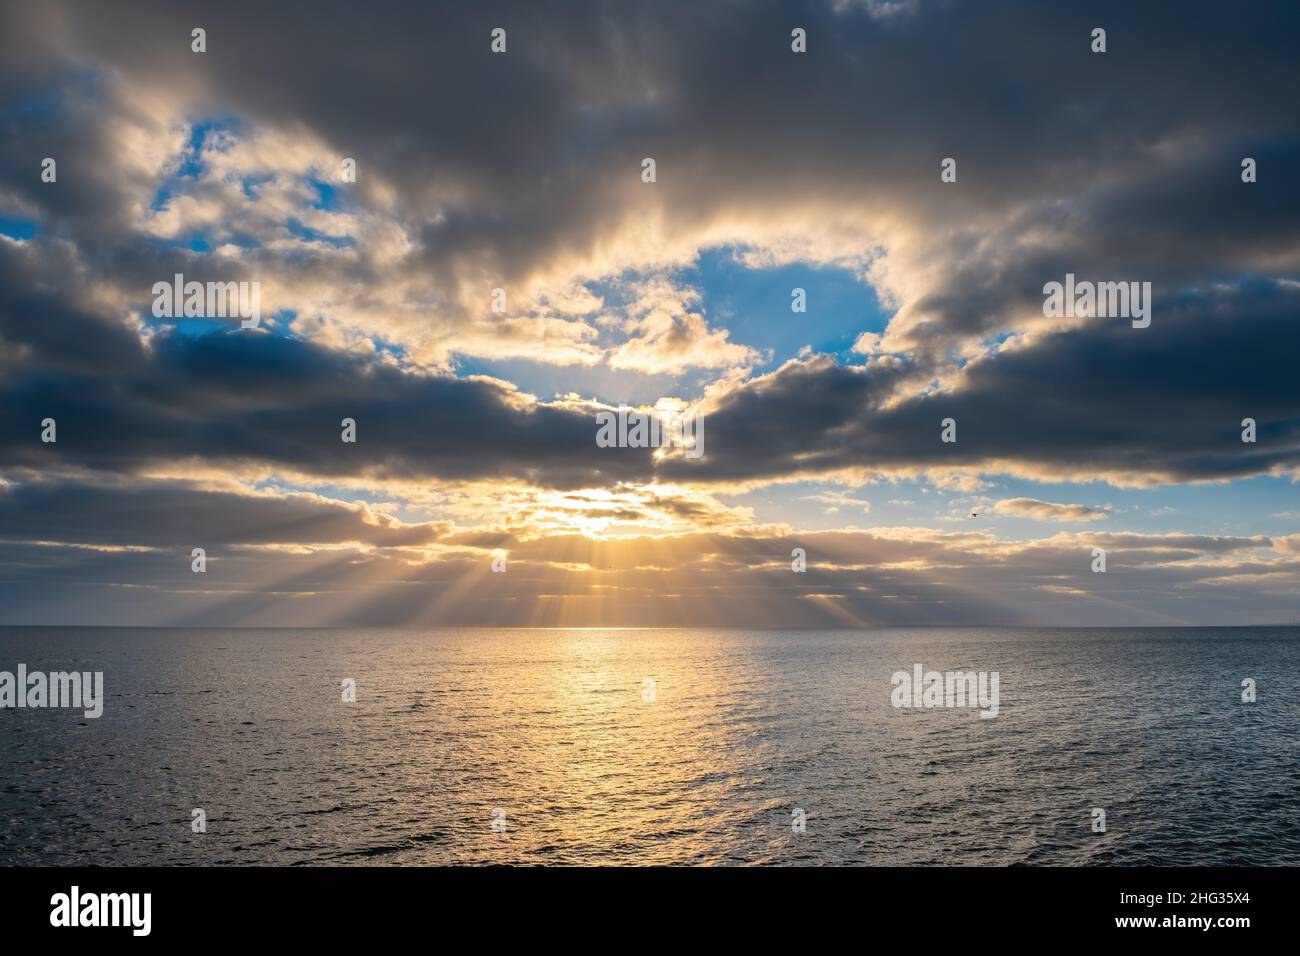 Minimalist seascape at sunset with sun rays protruding through clouds Stock Photo